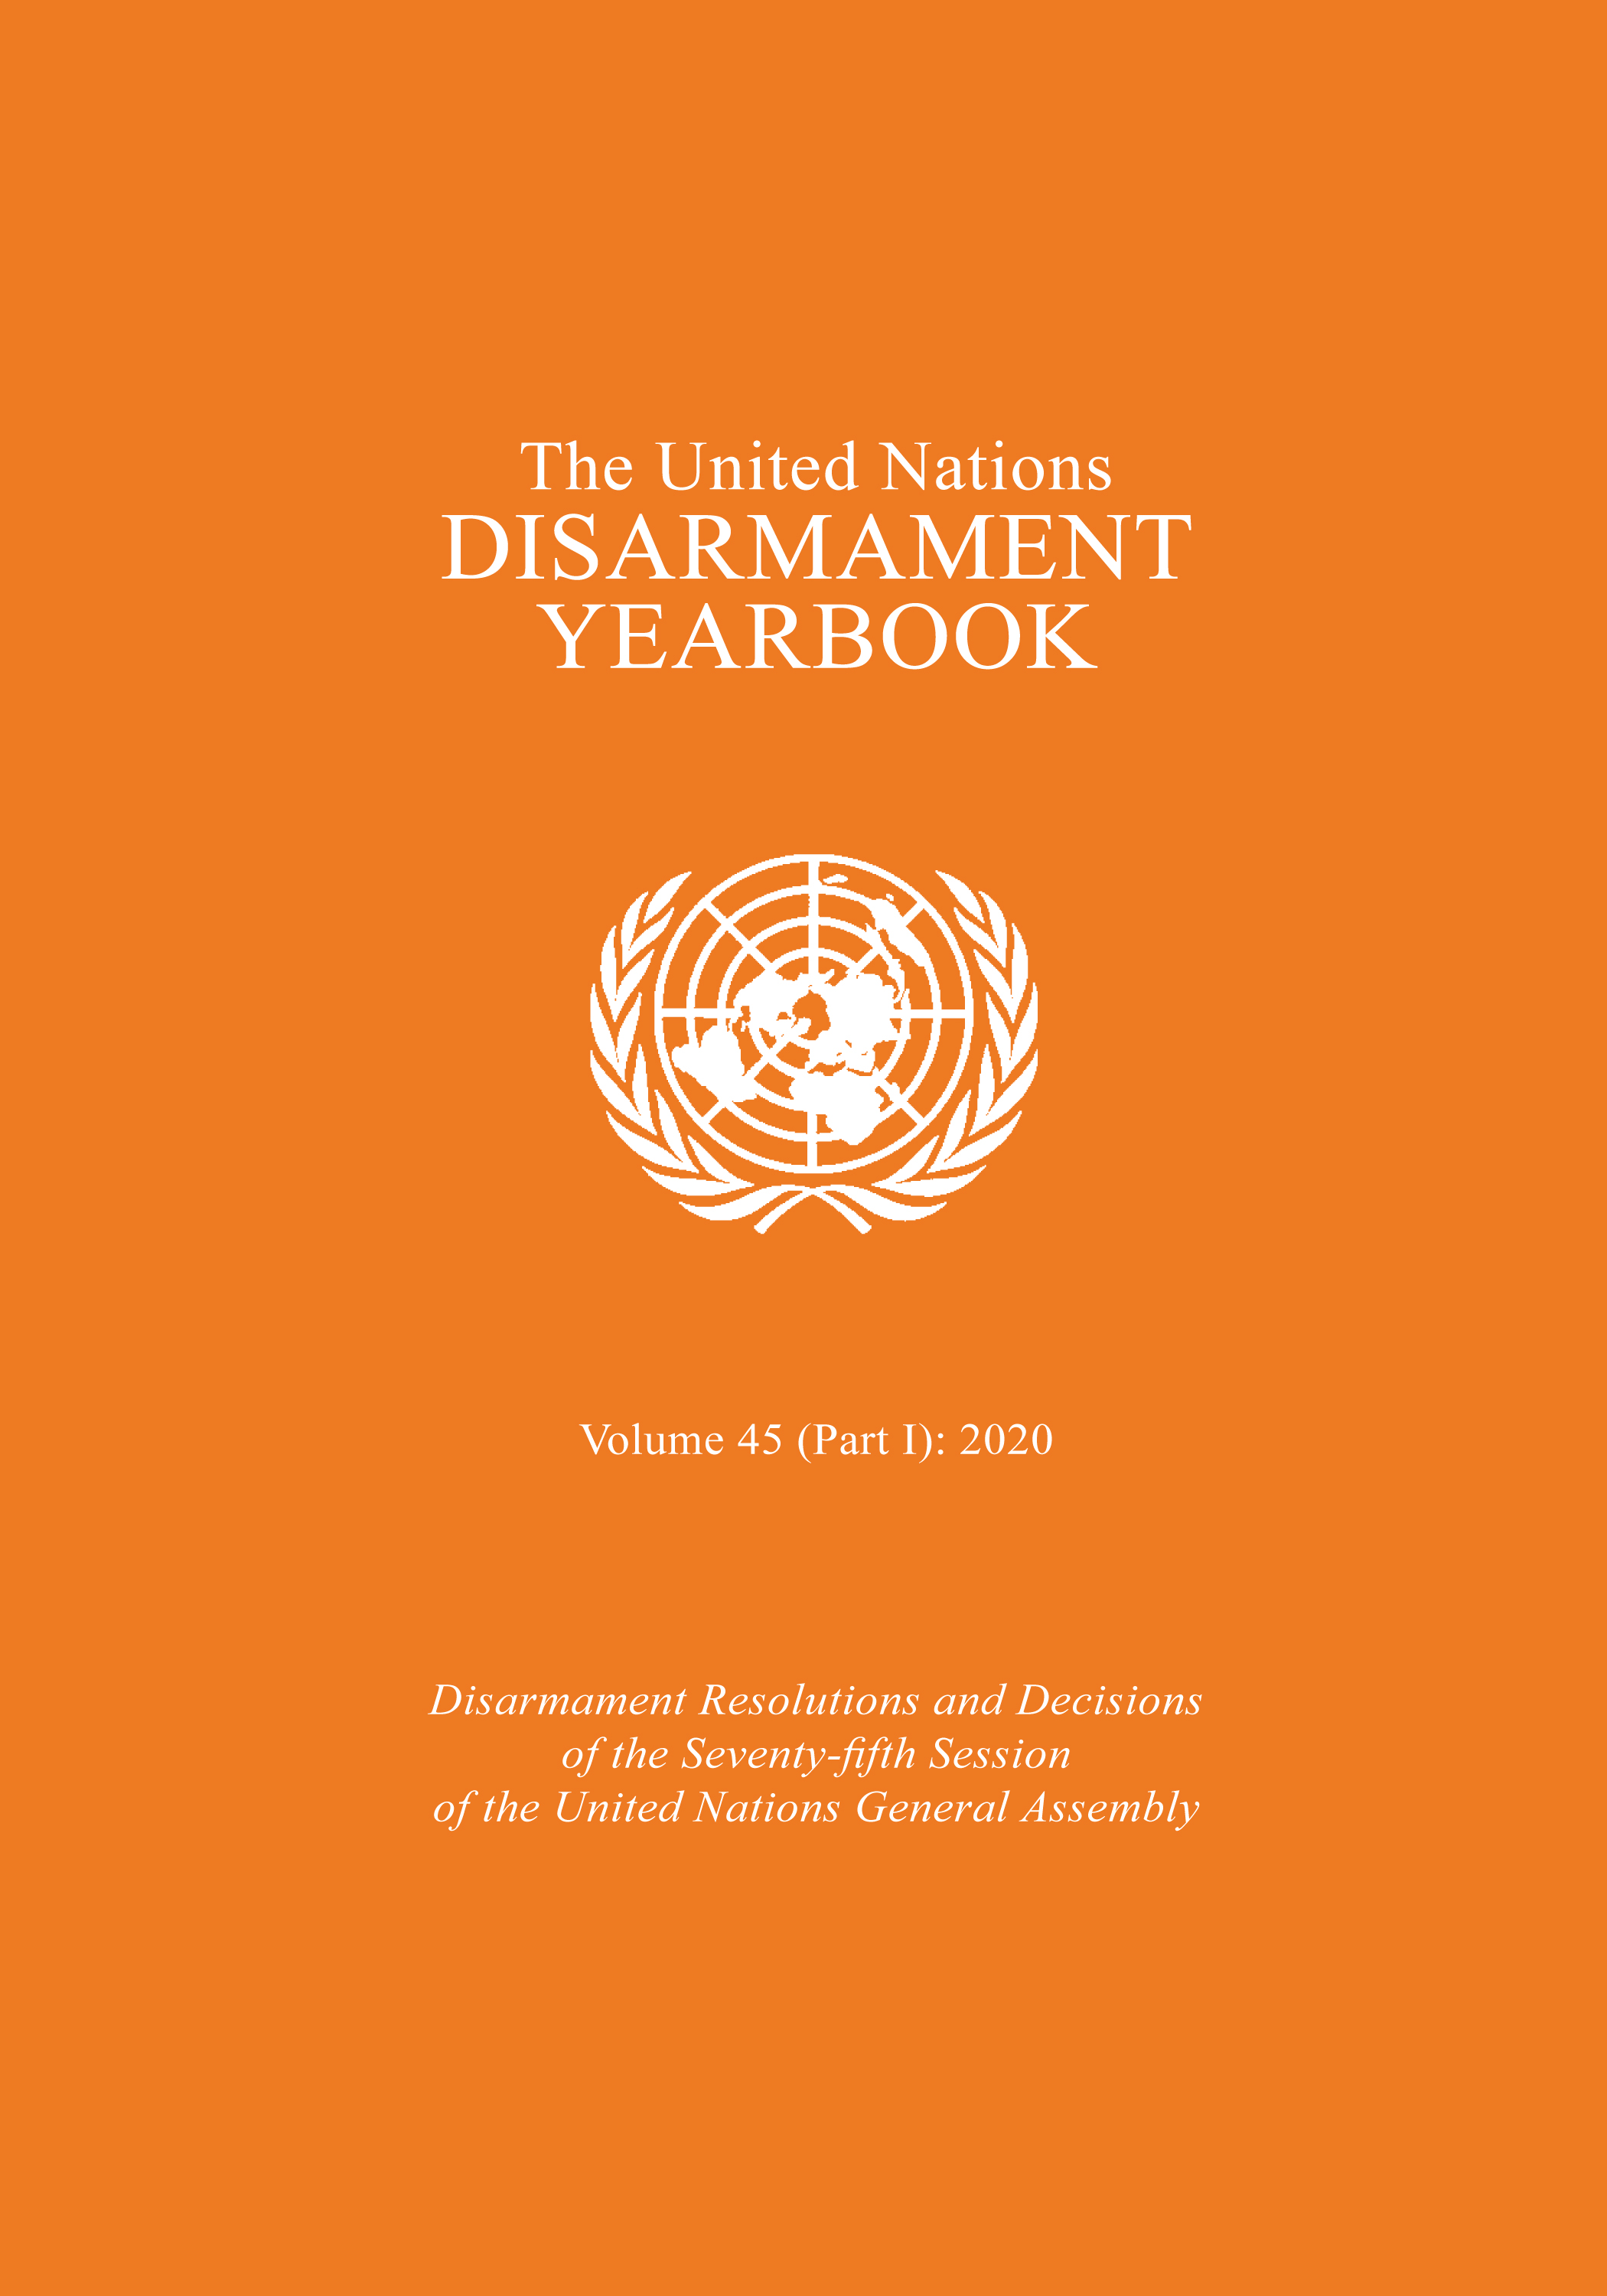 image of The United Nations Disarmament Yearbook 2020: Part I